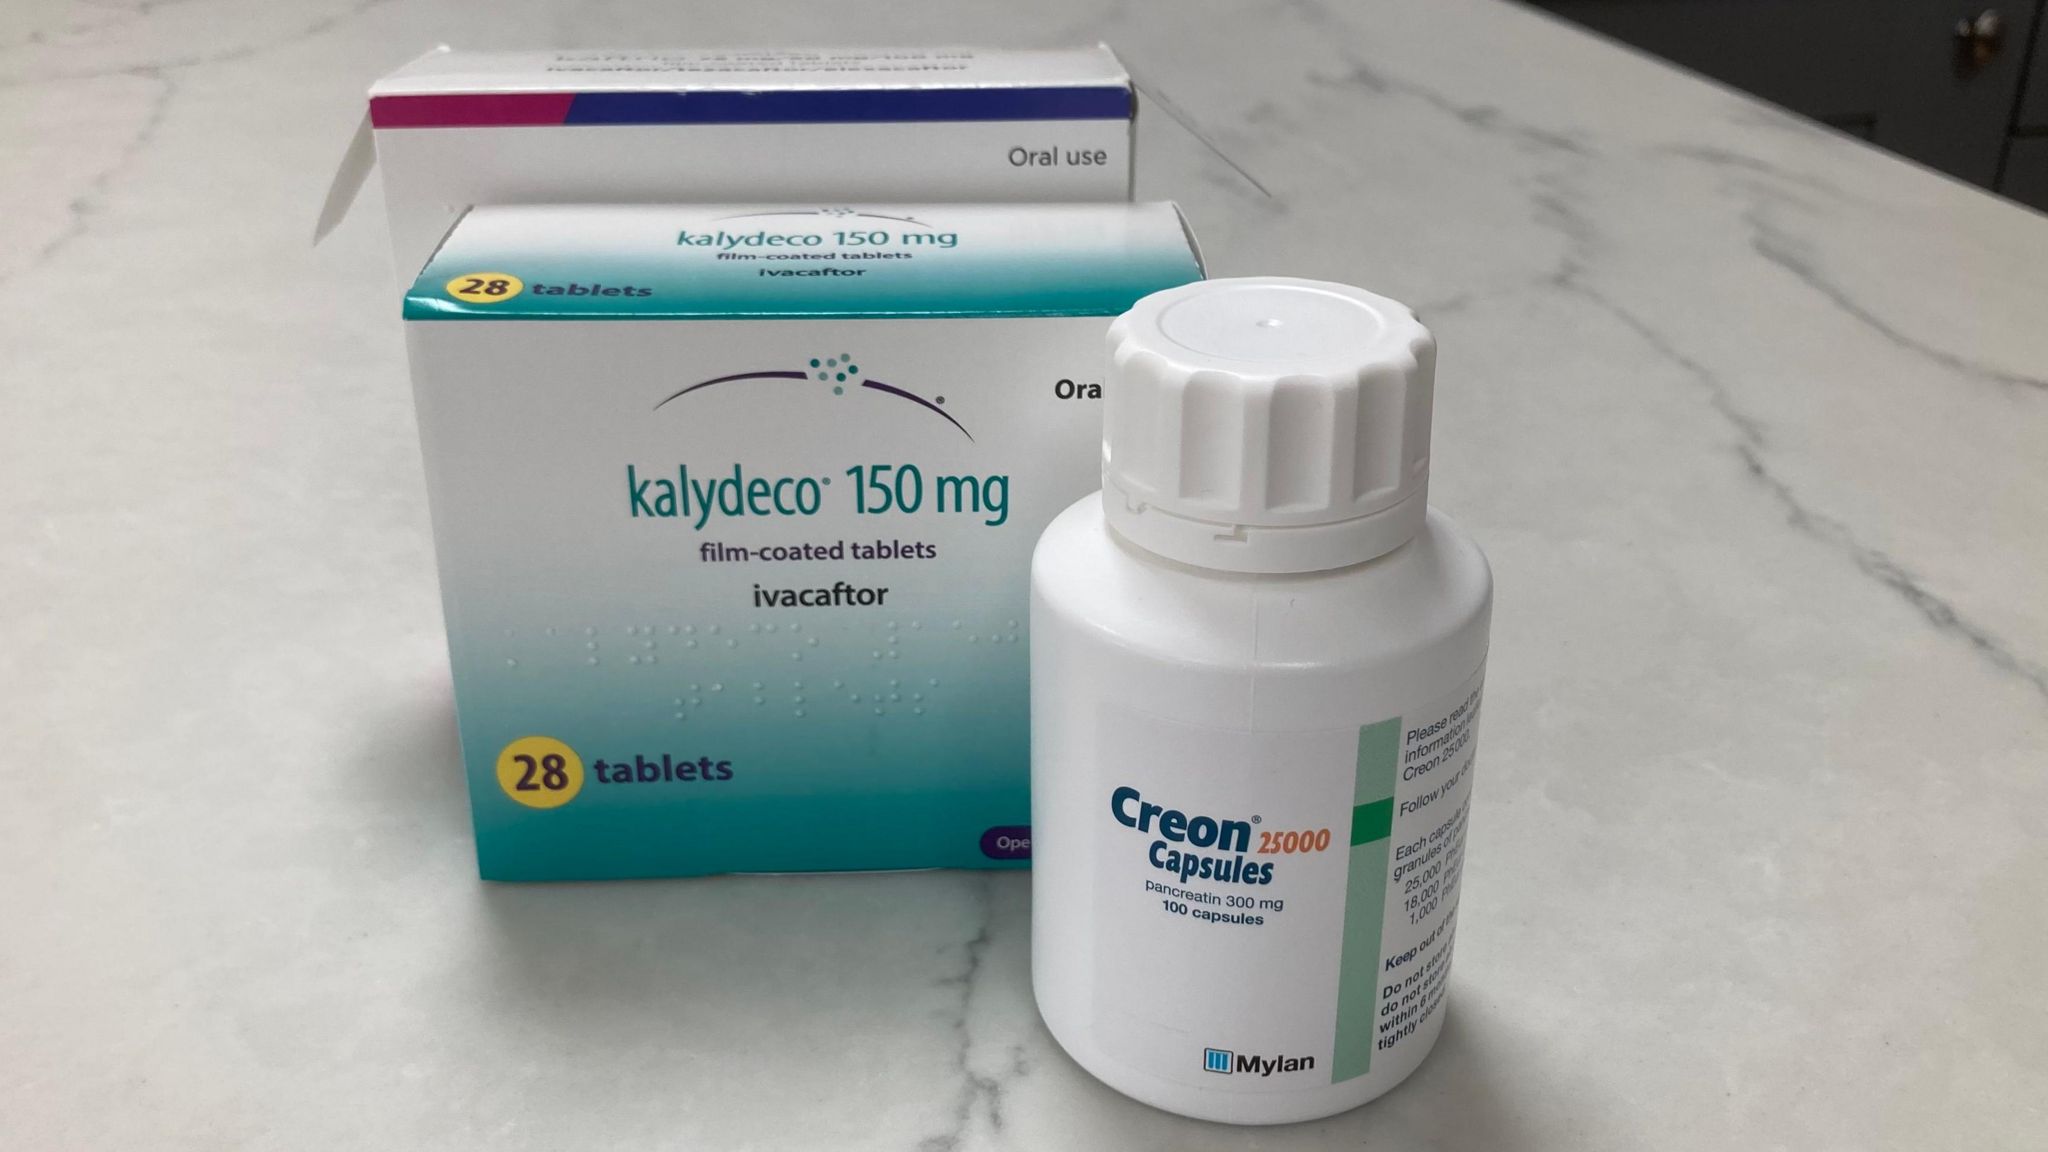 A bottle of Creon tablets and box of Kalydeco tablets